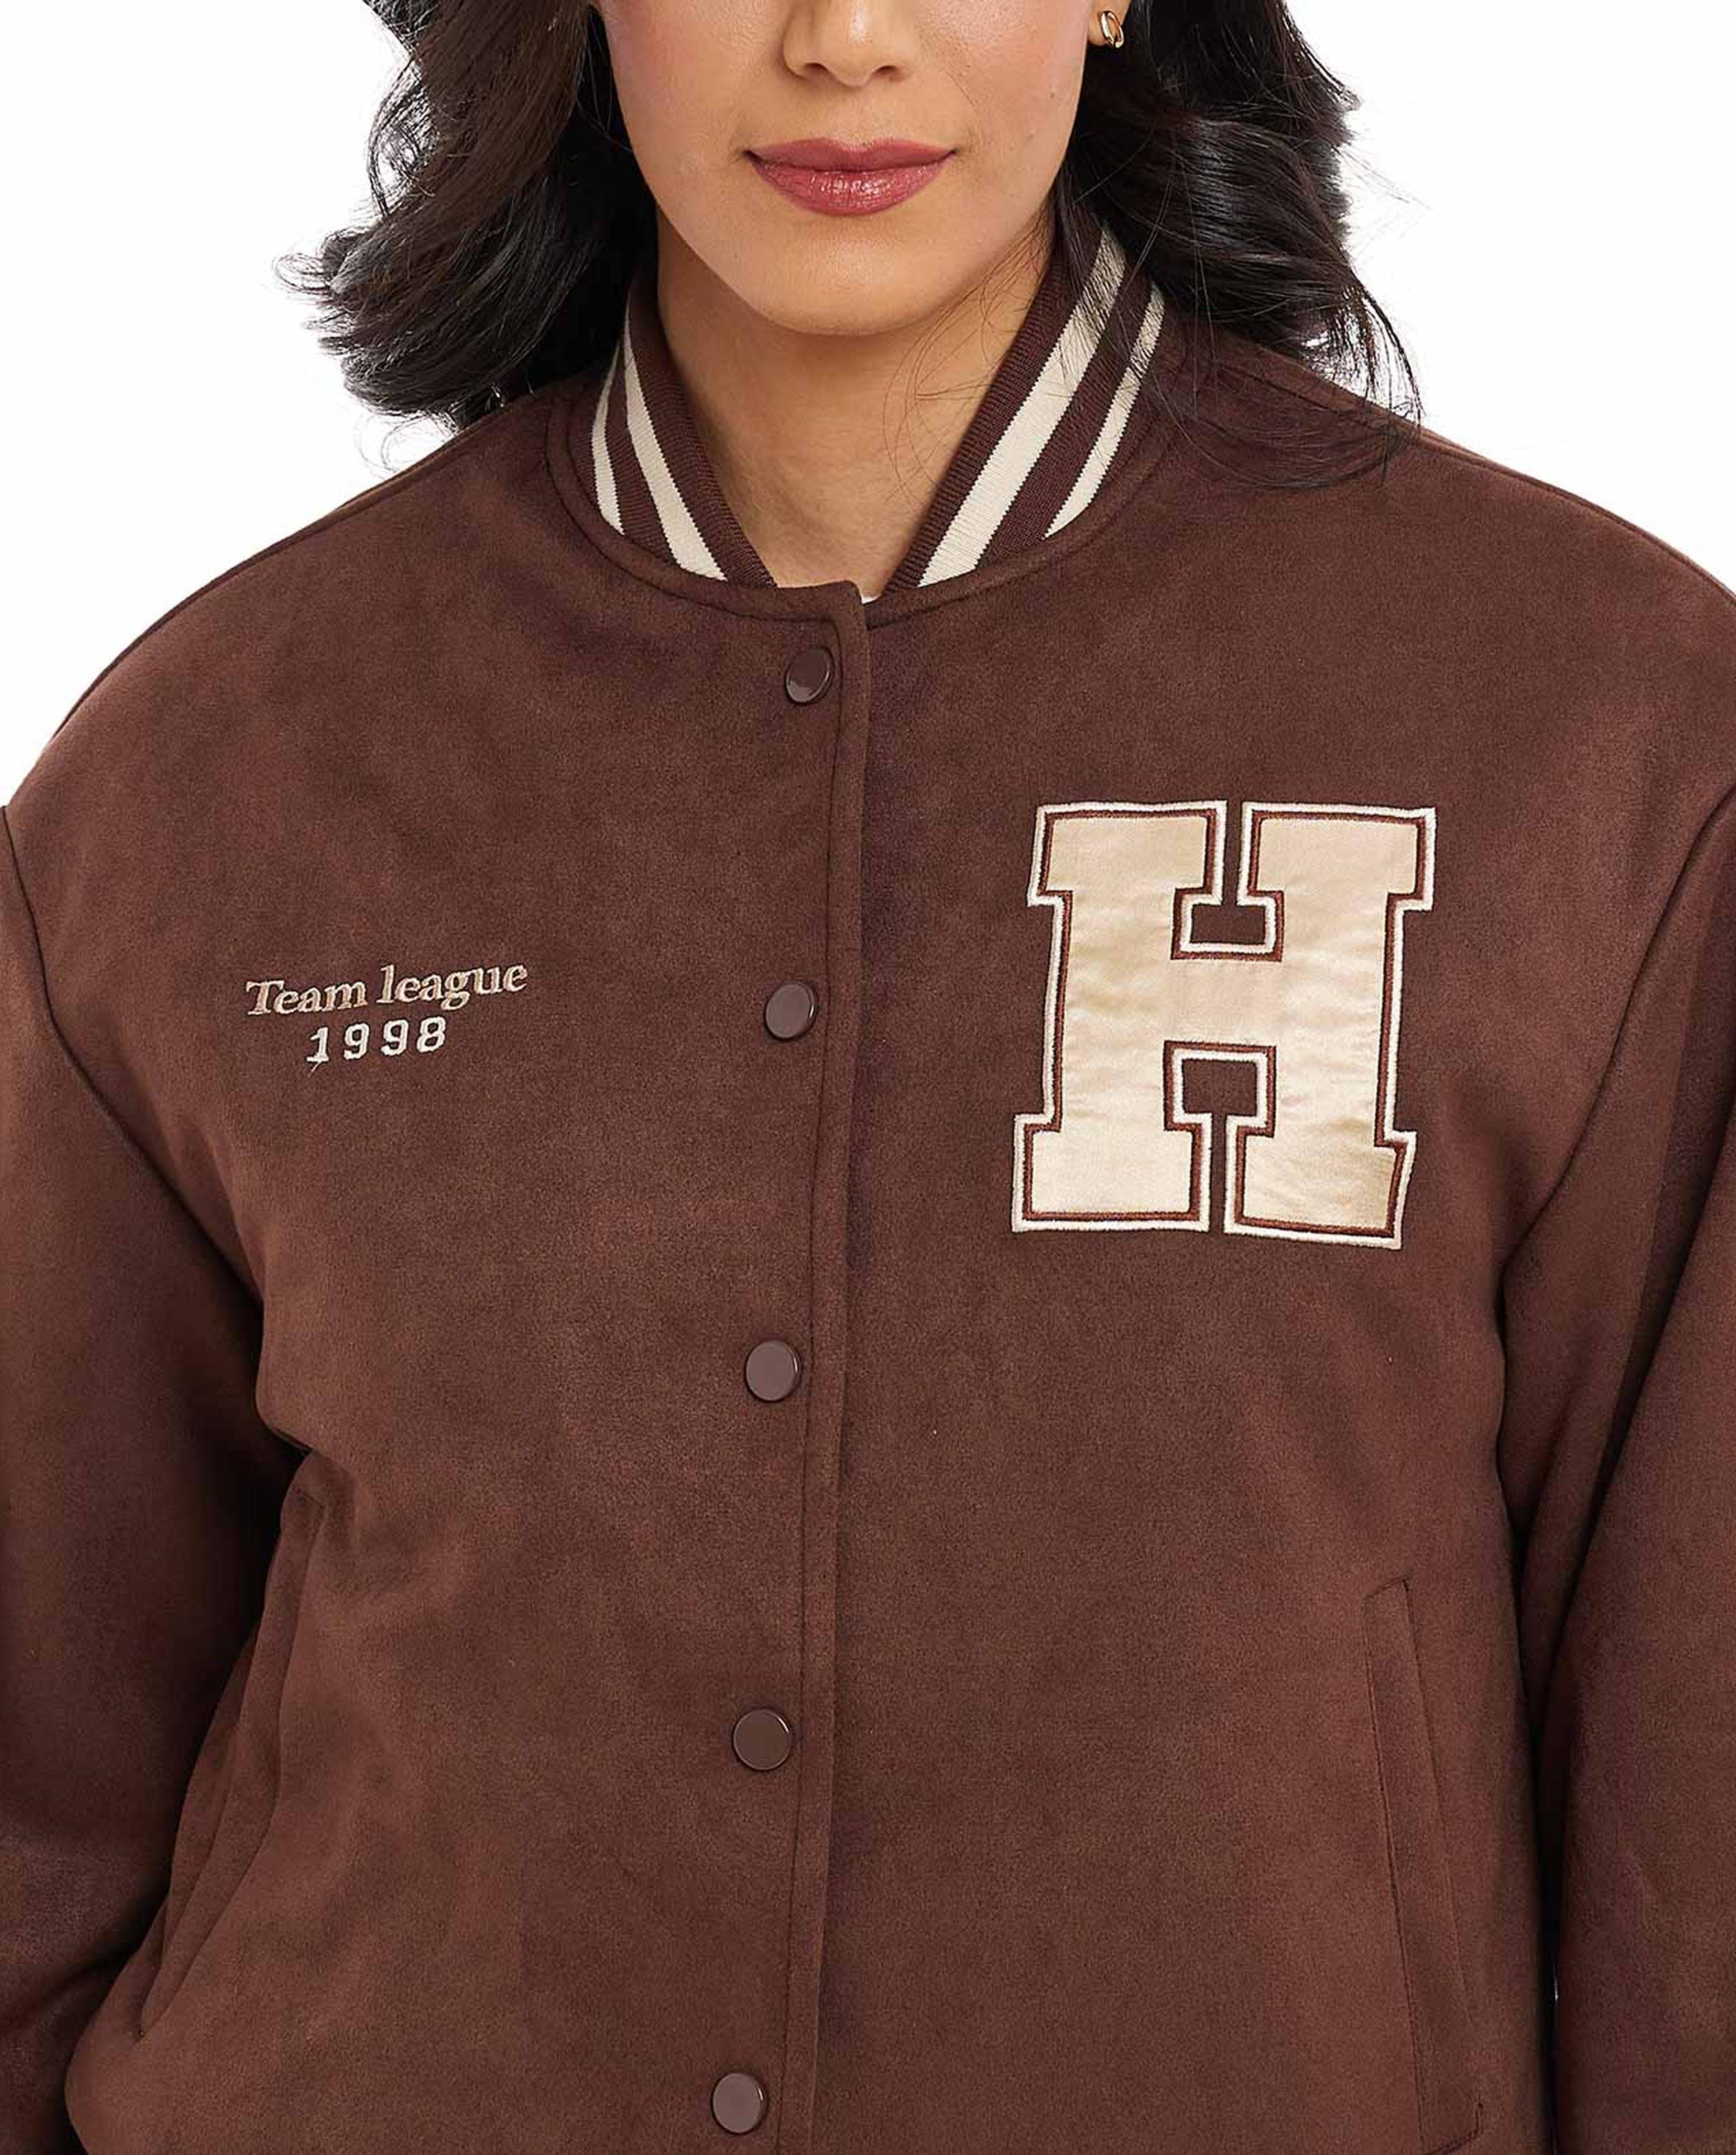 Letter Print Varsity Jacket with Snap Button Closure